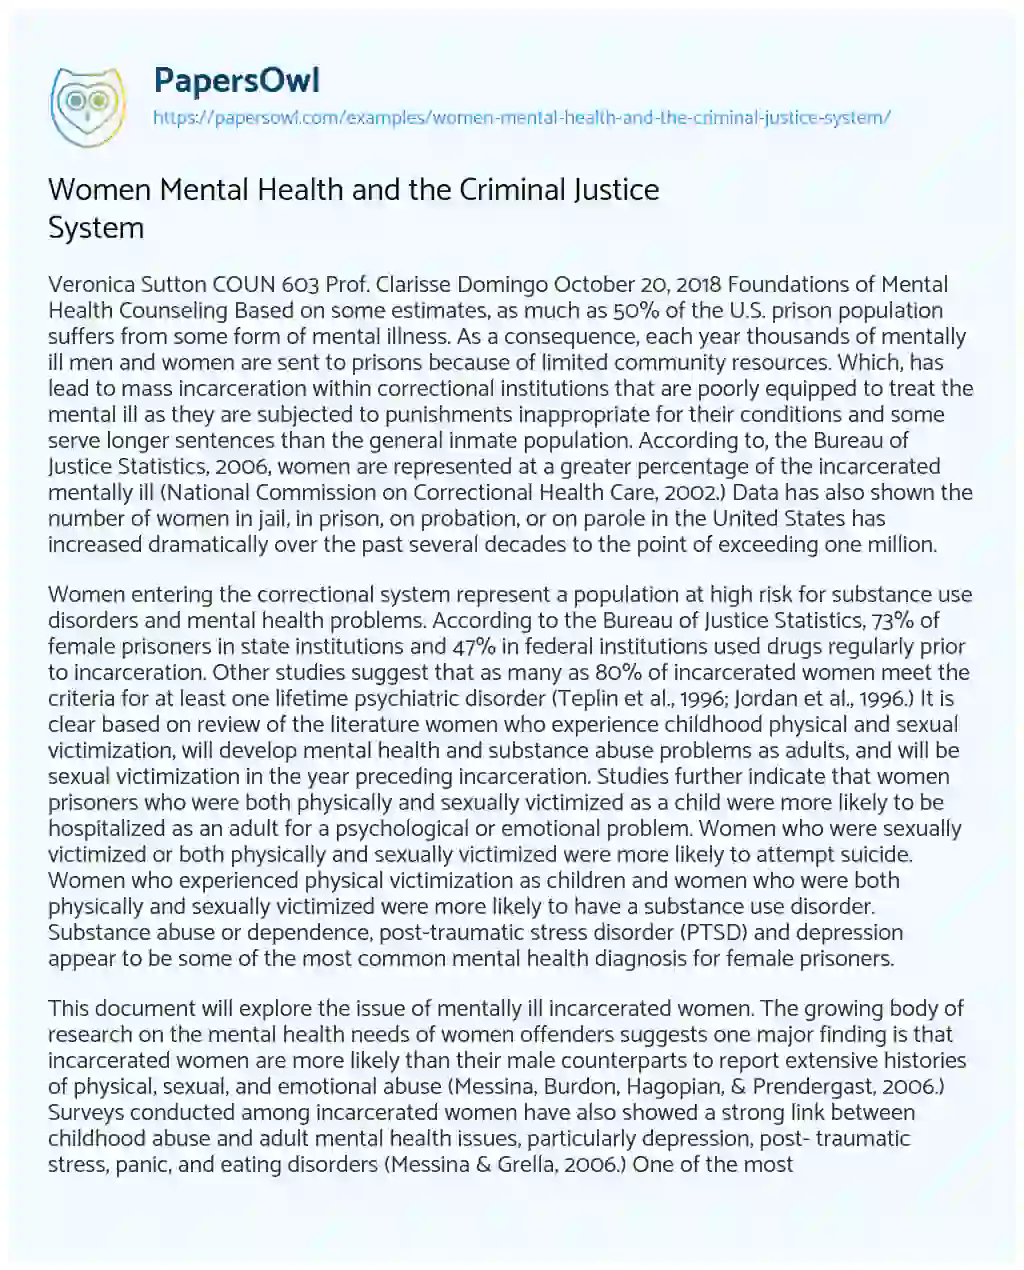 Women Mental Health and the Criminal Justice System essay